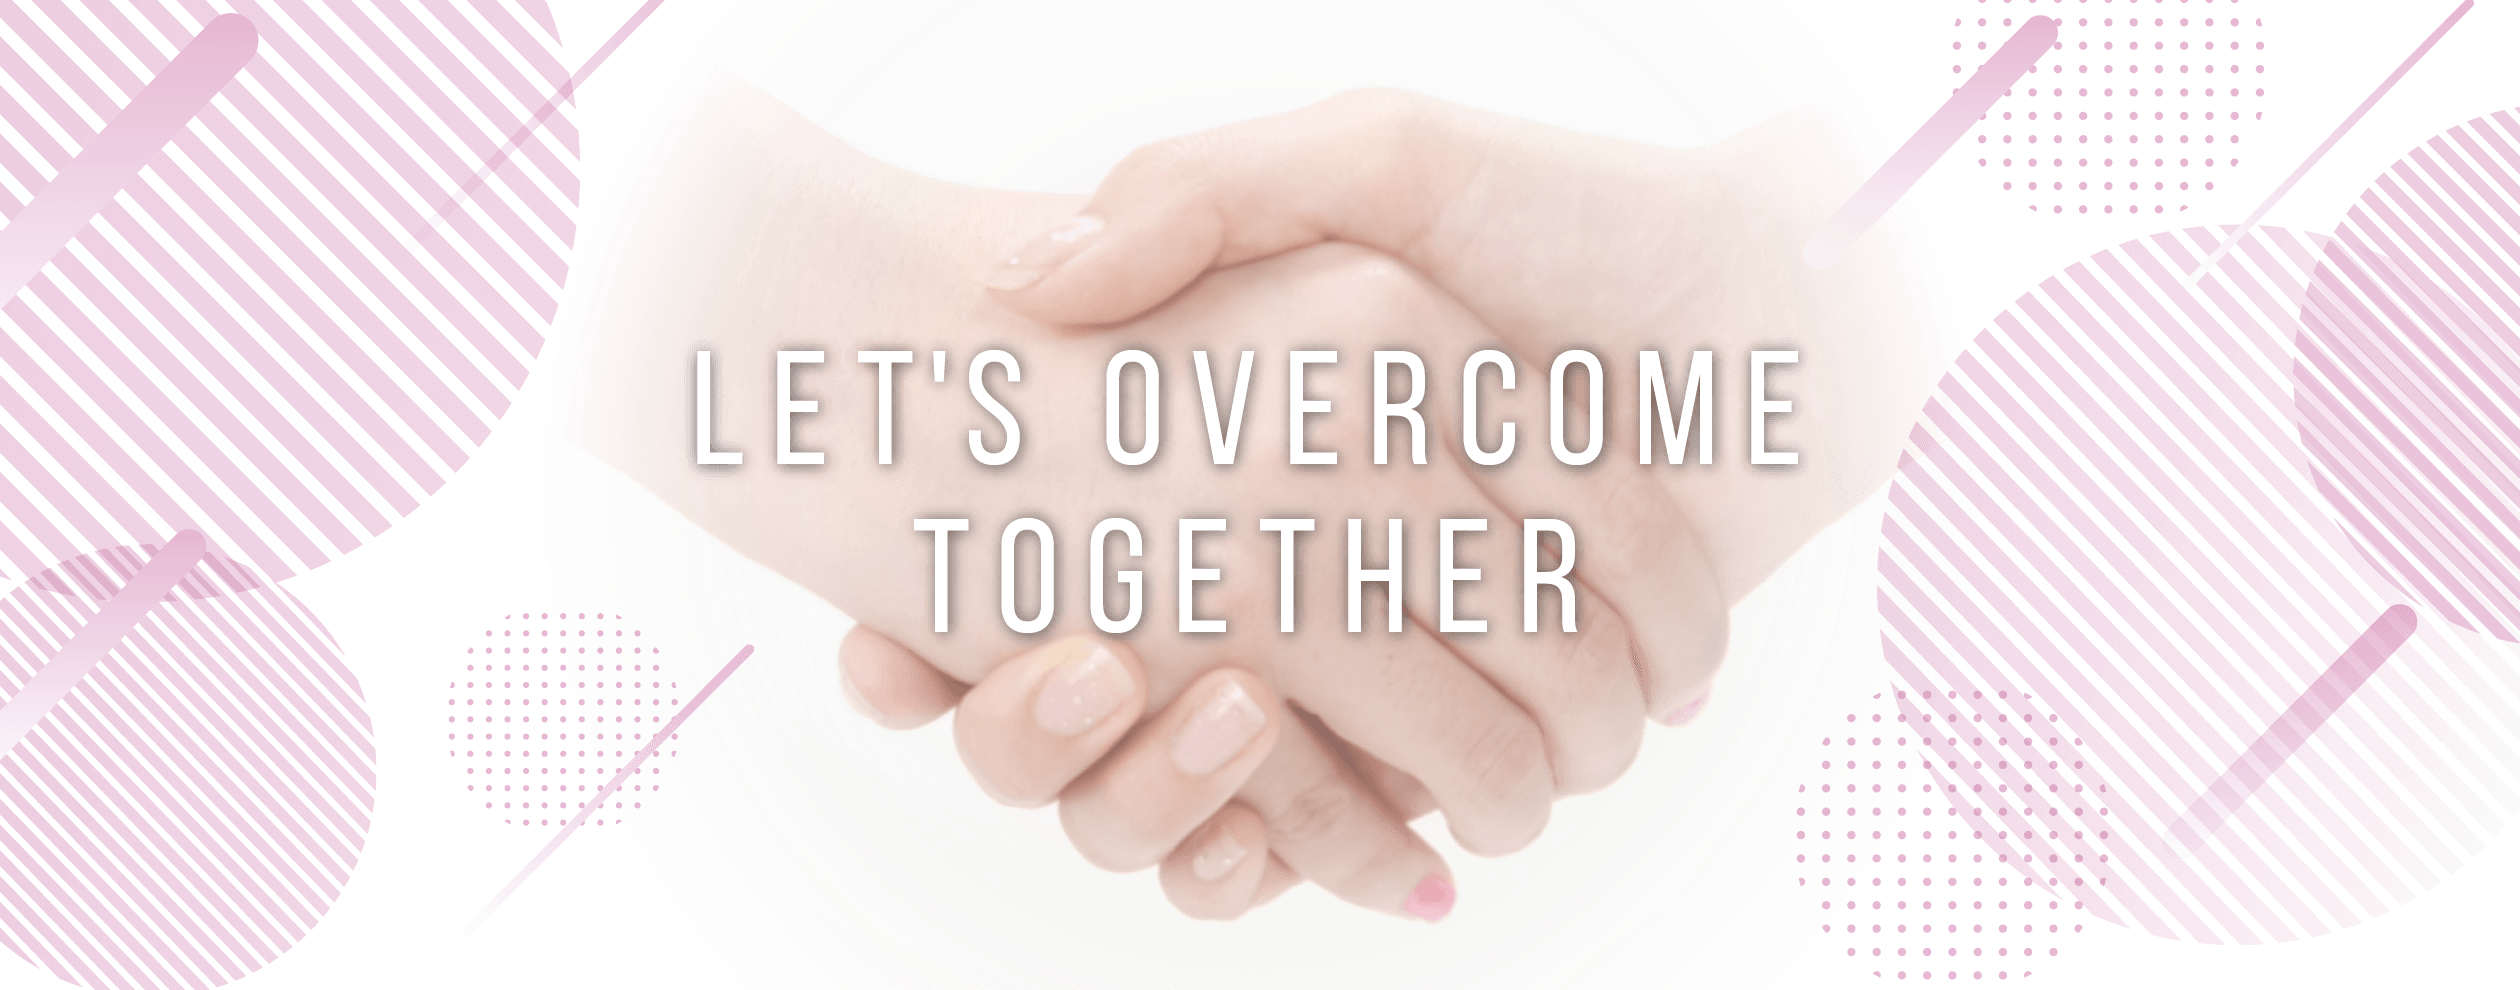 Let's overcome together